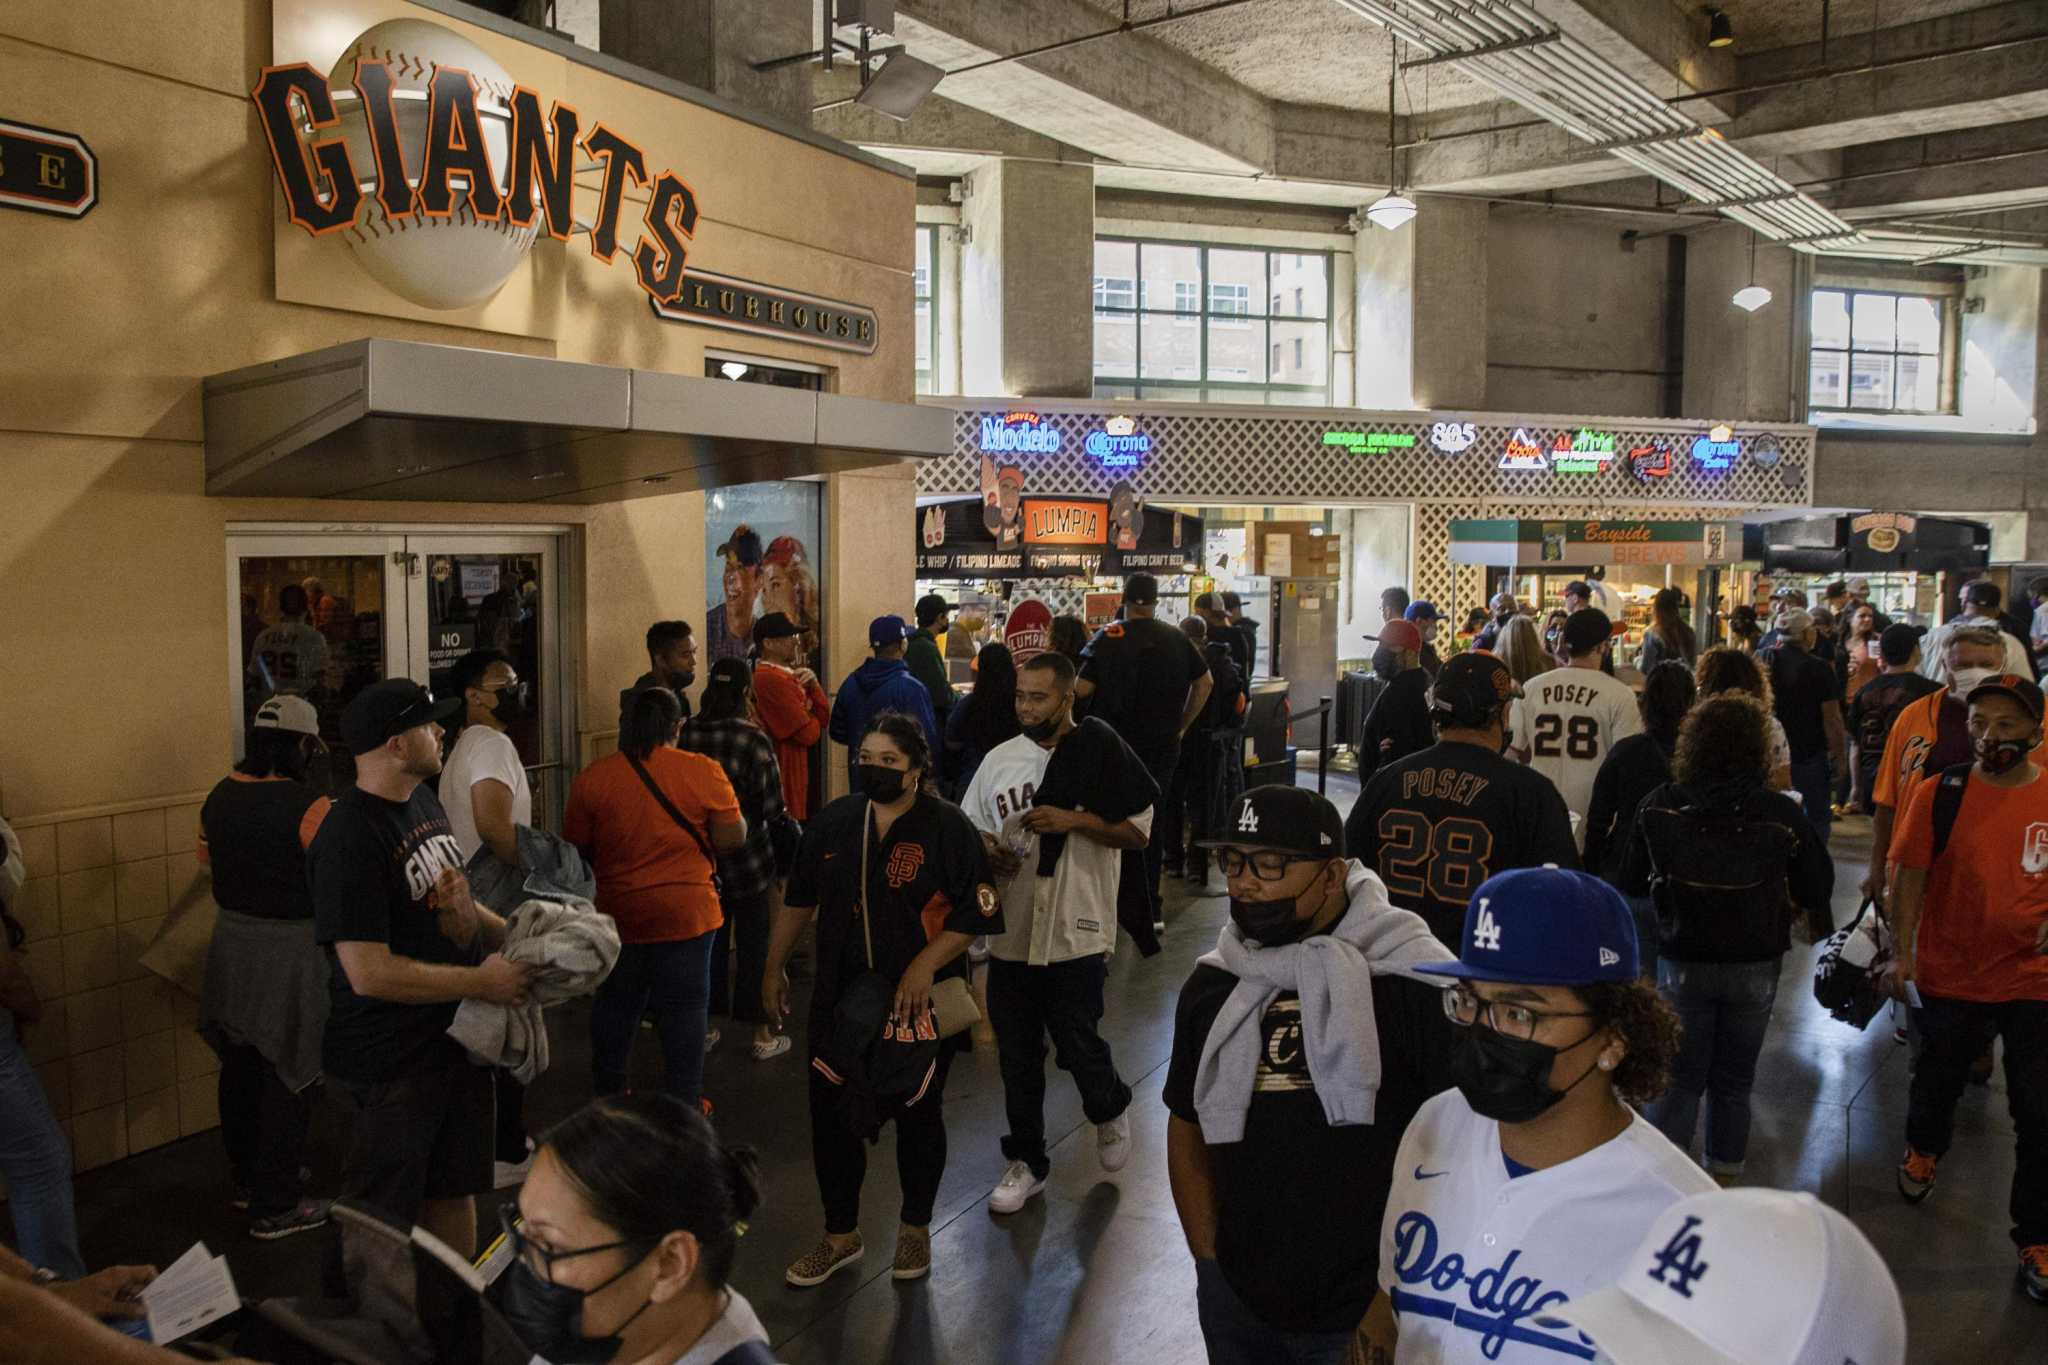 Dodger fans were out in full force for the Los Angeles Dodgers